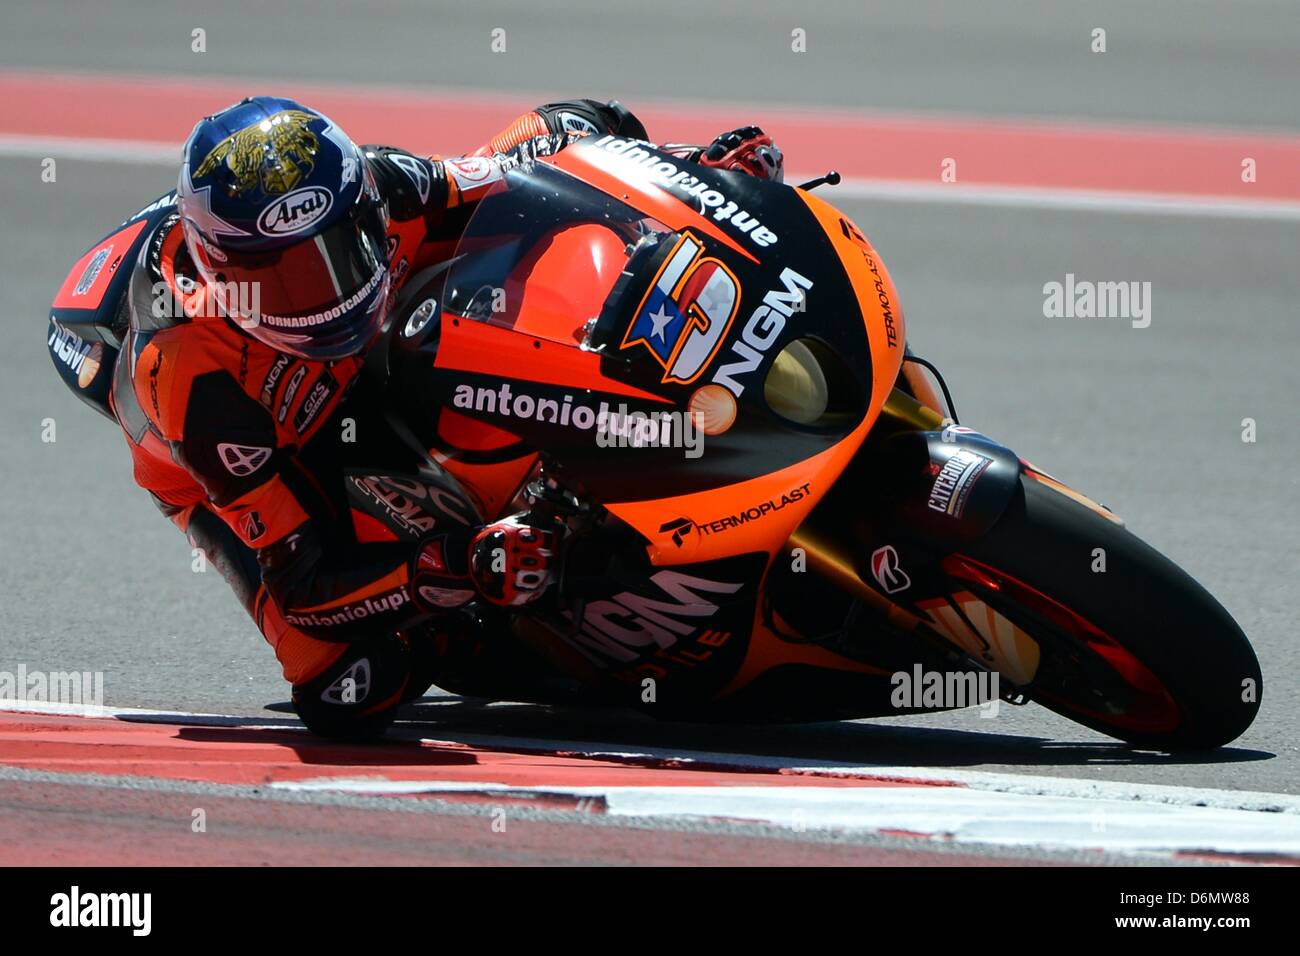 April 20, 2013. Colin Edwards #5 of NGM Foward Mobile Racing in action at the Circuit of the Americas in Austin Texas. Stock Photo